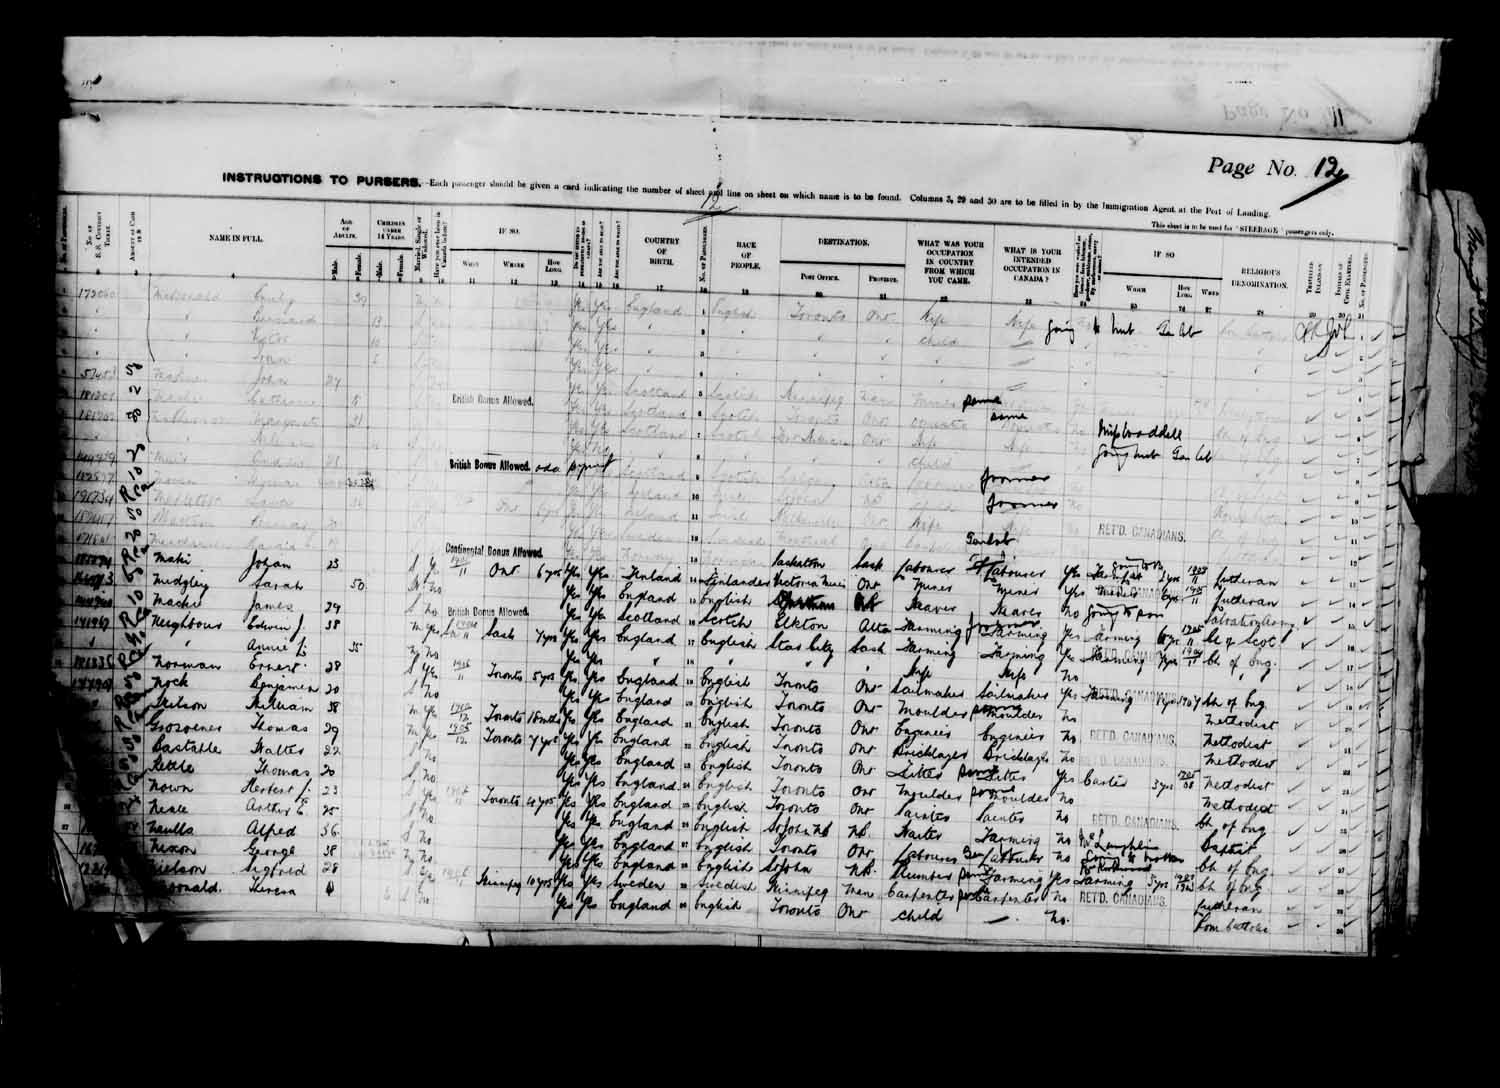 Digitized page of Passenger Lists for Image No.: e003627201